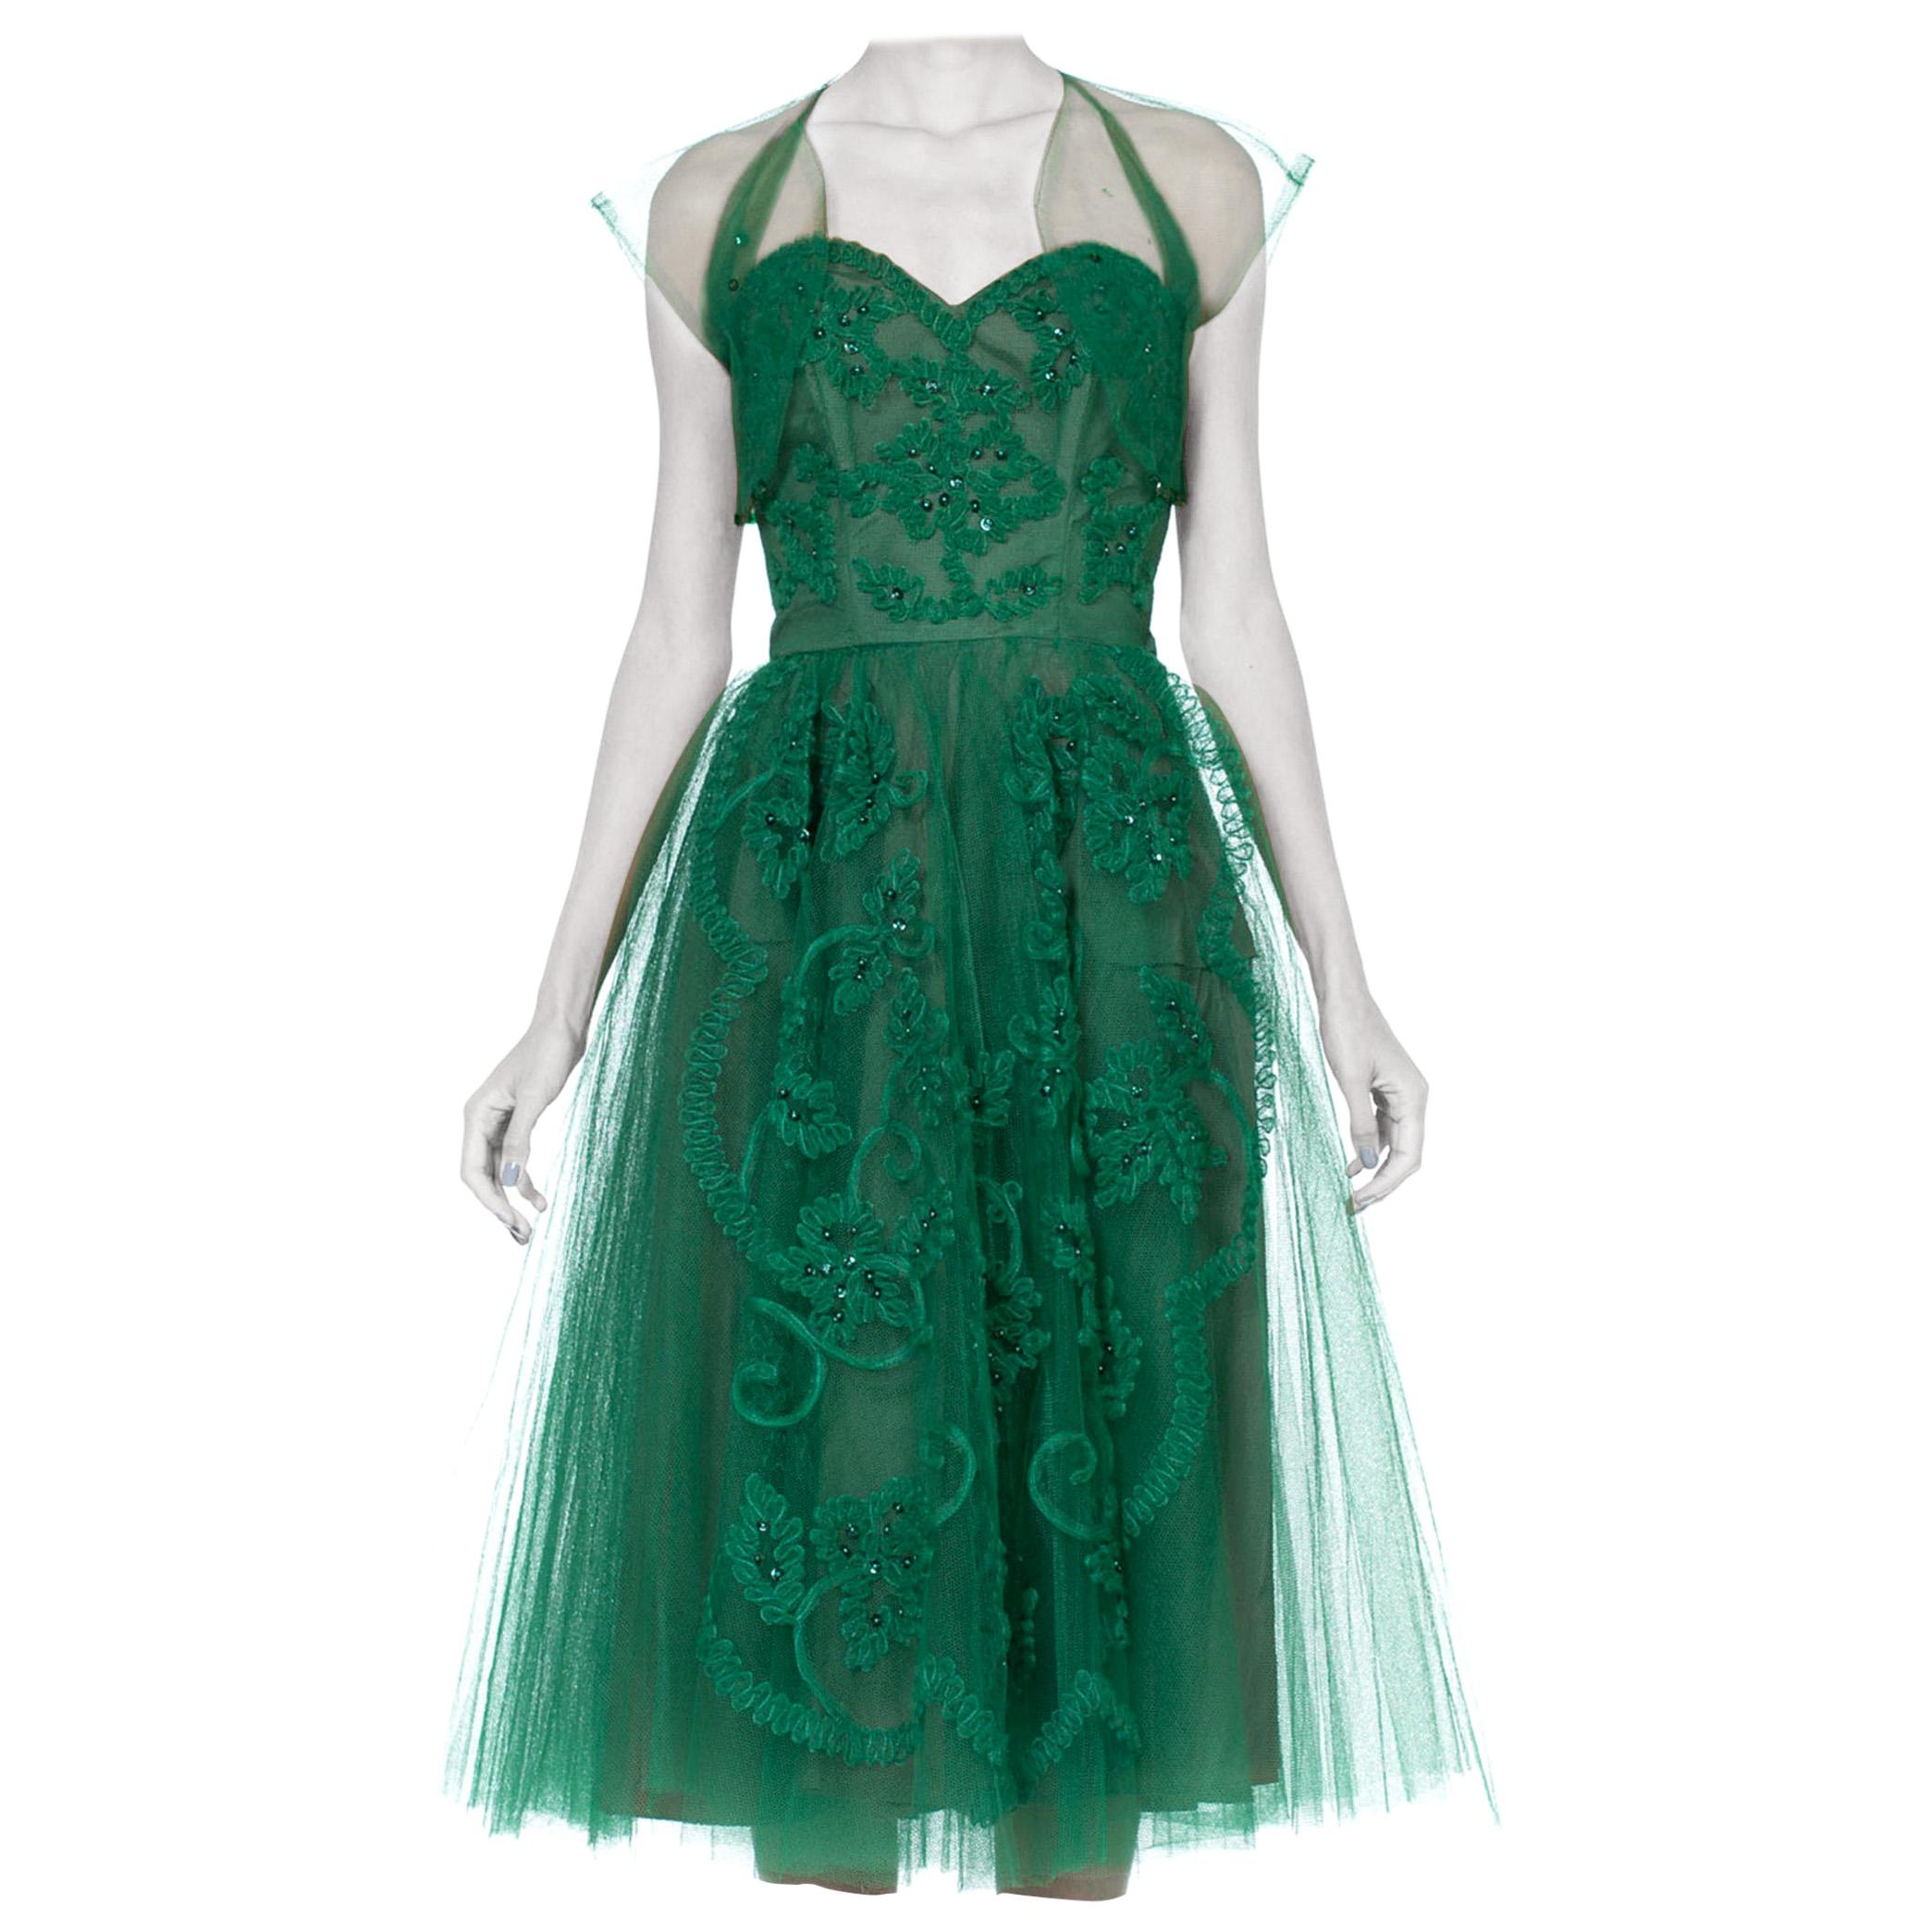 1950S Emerald Green Nylon Tulle Strapless Party Dress Appliquéd & Beaded With M